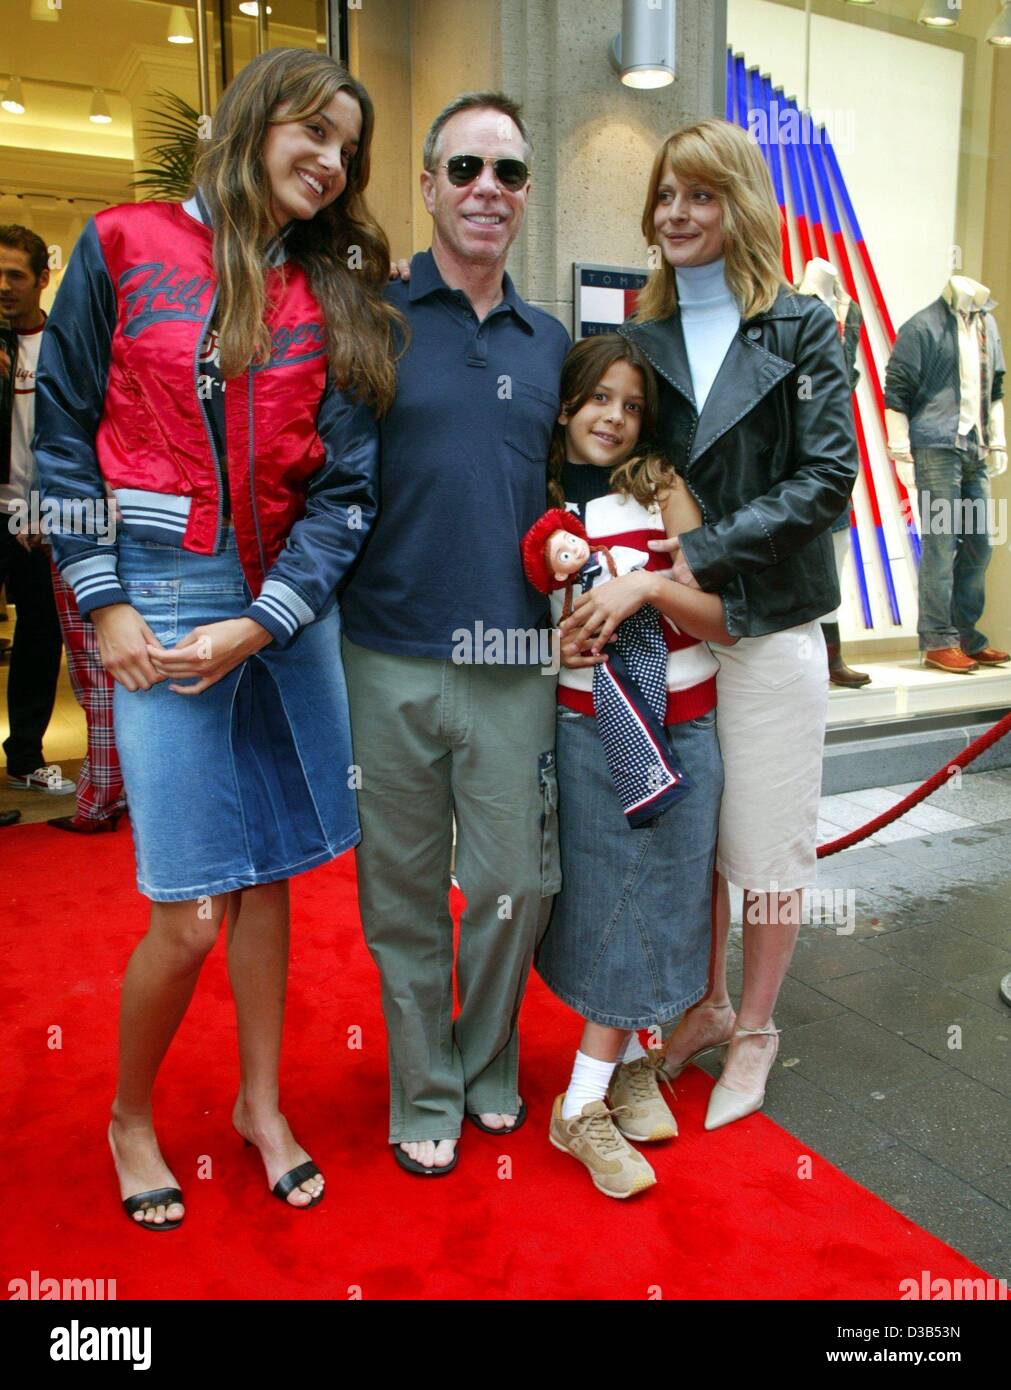 dpa) - US fashion designer Tommy Hilfiger poses with German actress  Nastassja Kinski (R) and her daughters Sonja (L) and Kenya (C) in front of  his new shop in Duesseldorf, Germany, 3